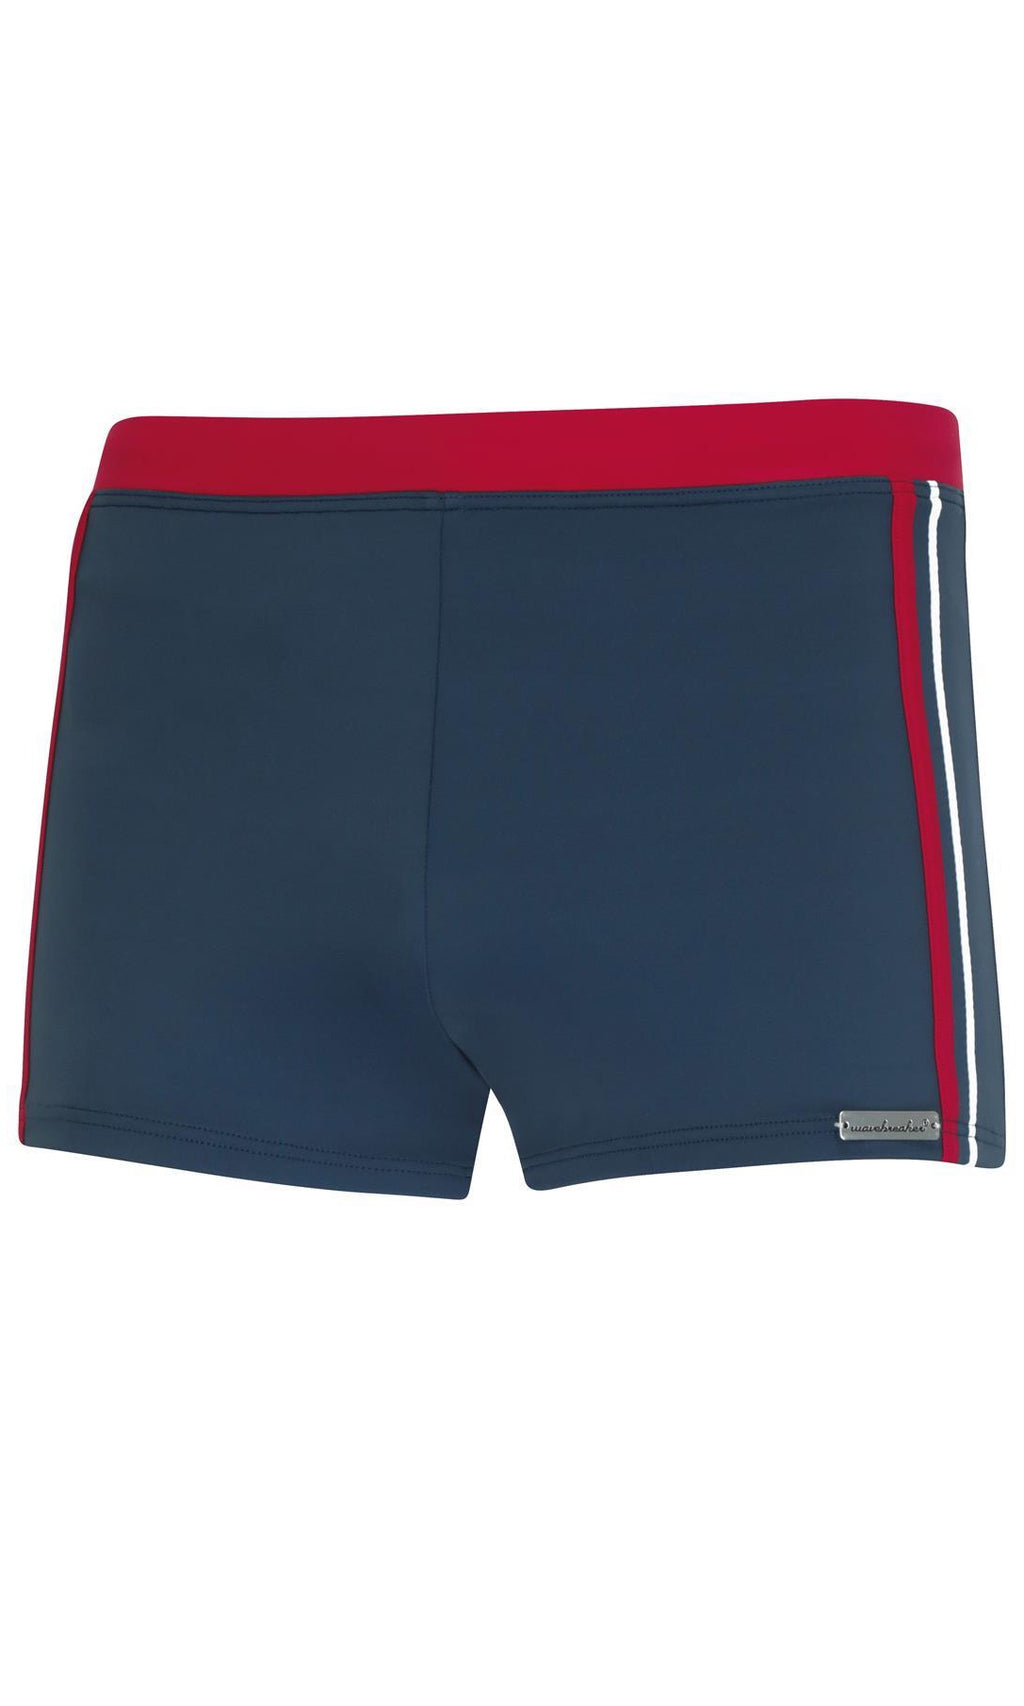 Classic Nautical Trunks, Special Order S - XL